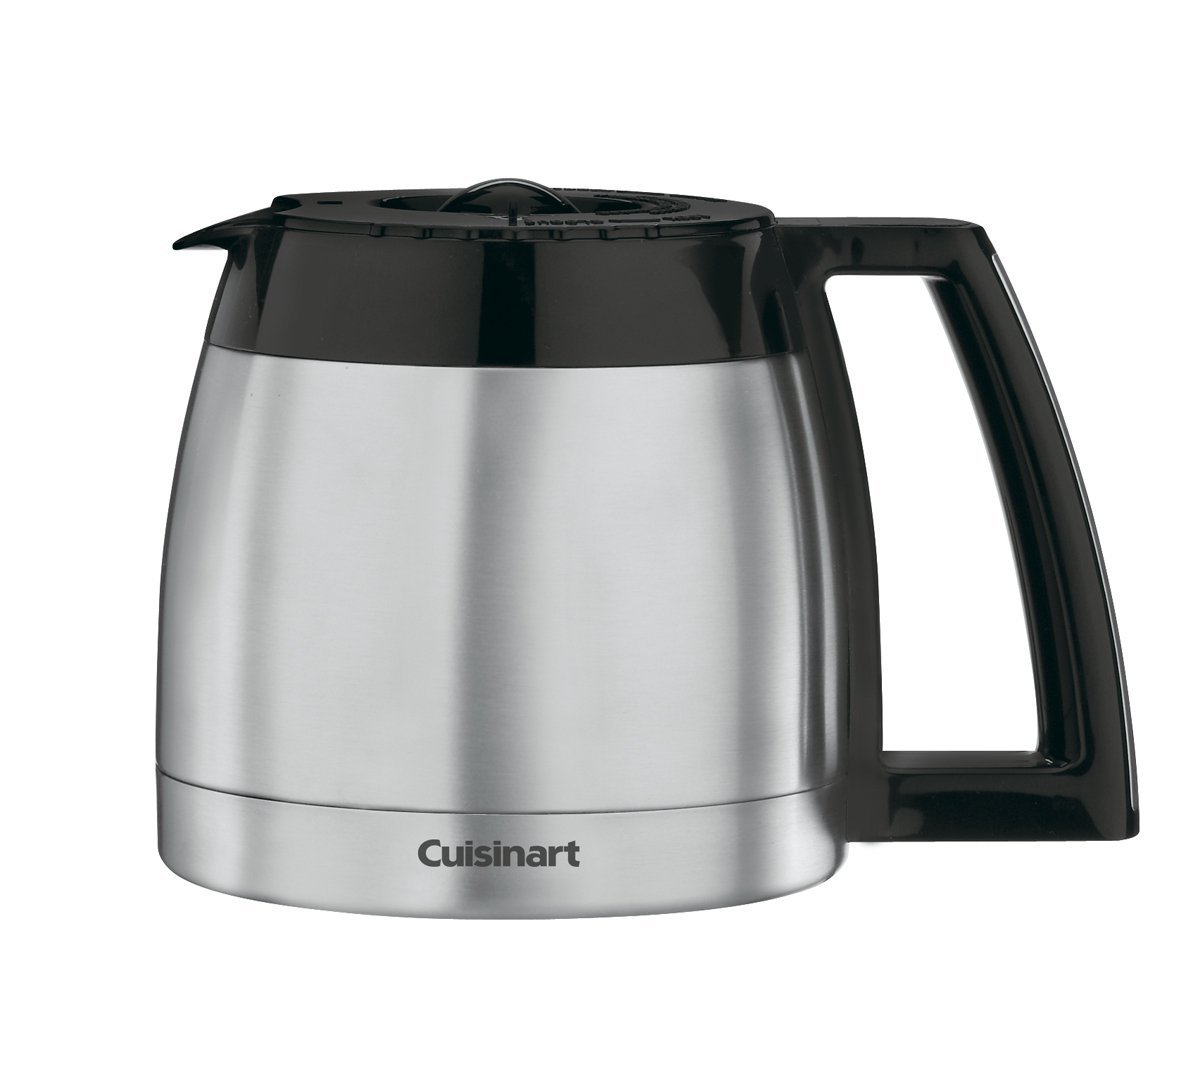 Cuisinart DGB-900BC Grind-and-Brew 12-Cup Automatic Coffeemakers